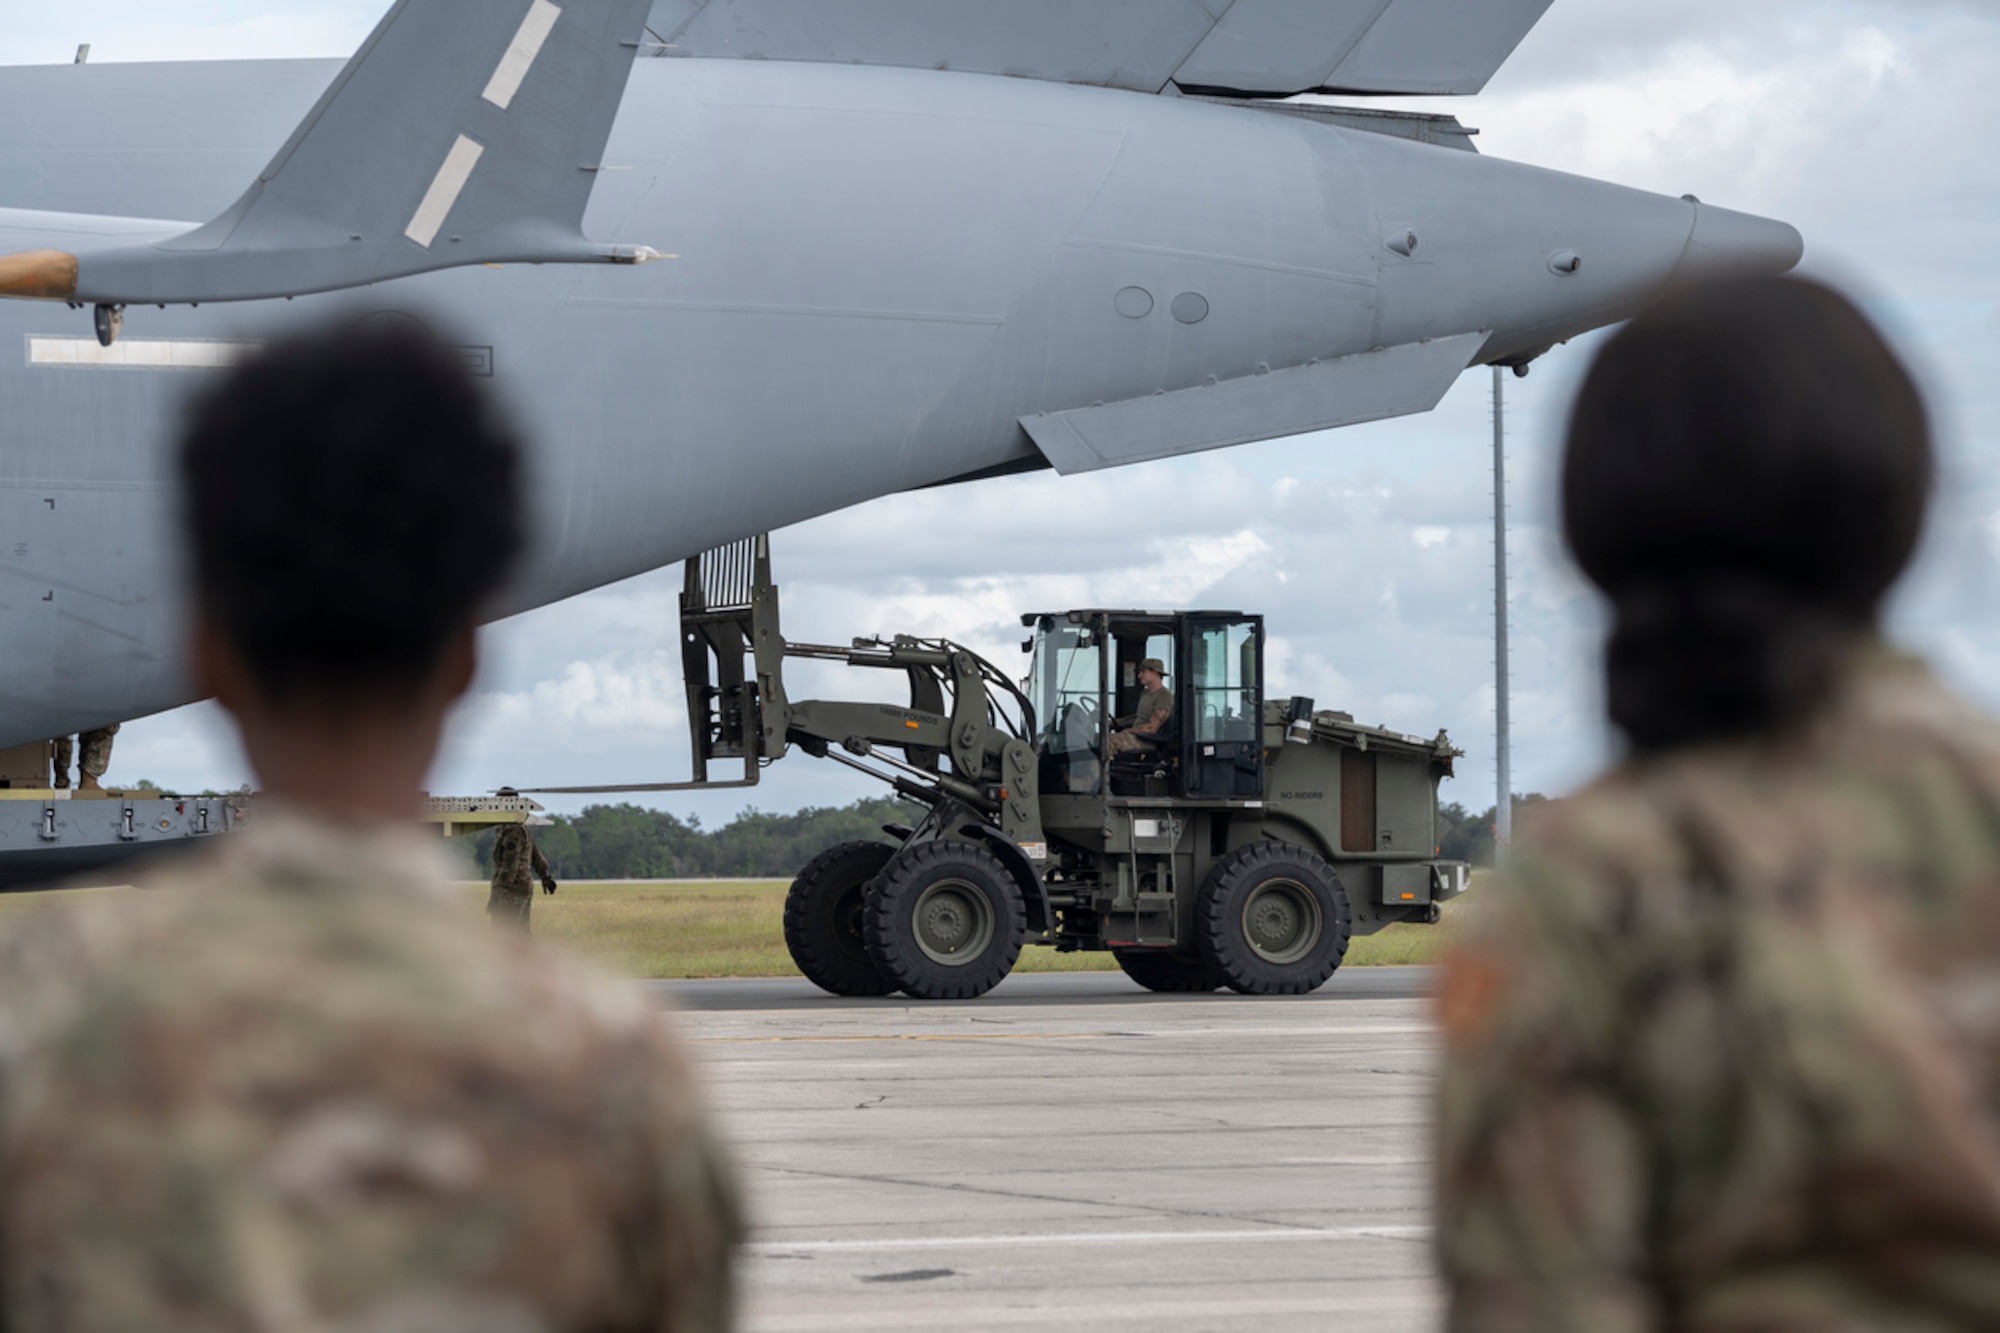 A U.S. Air Force Airman assigned to the 23rd Logistic Readiness Squadron ground transportation flight unloads pallets from a C-17 Globemaster III during exercise Mosaic Tiger 24-1 at Avon Park Air Force Range, Florida, Nov. 13, 2023. The pallets consisted of participant’s personal luggage, protective gear and flightline equipment. (U.S. Air Force photo by Senior Airman Rachel Coates)